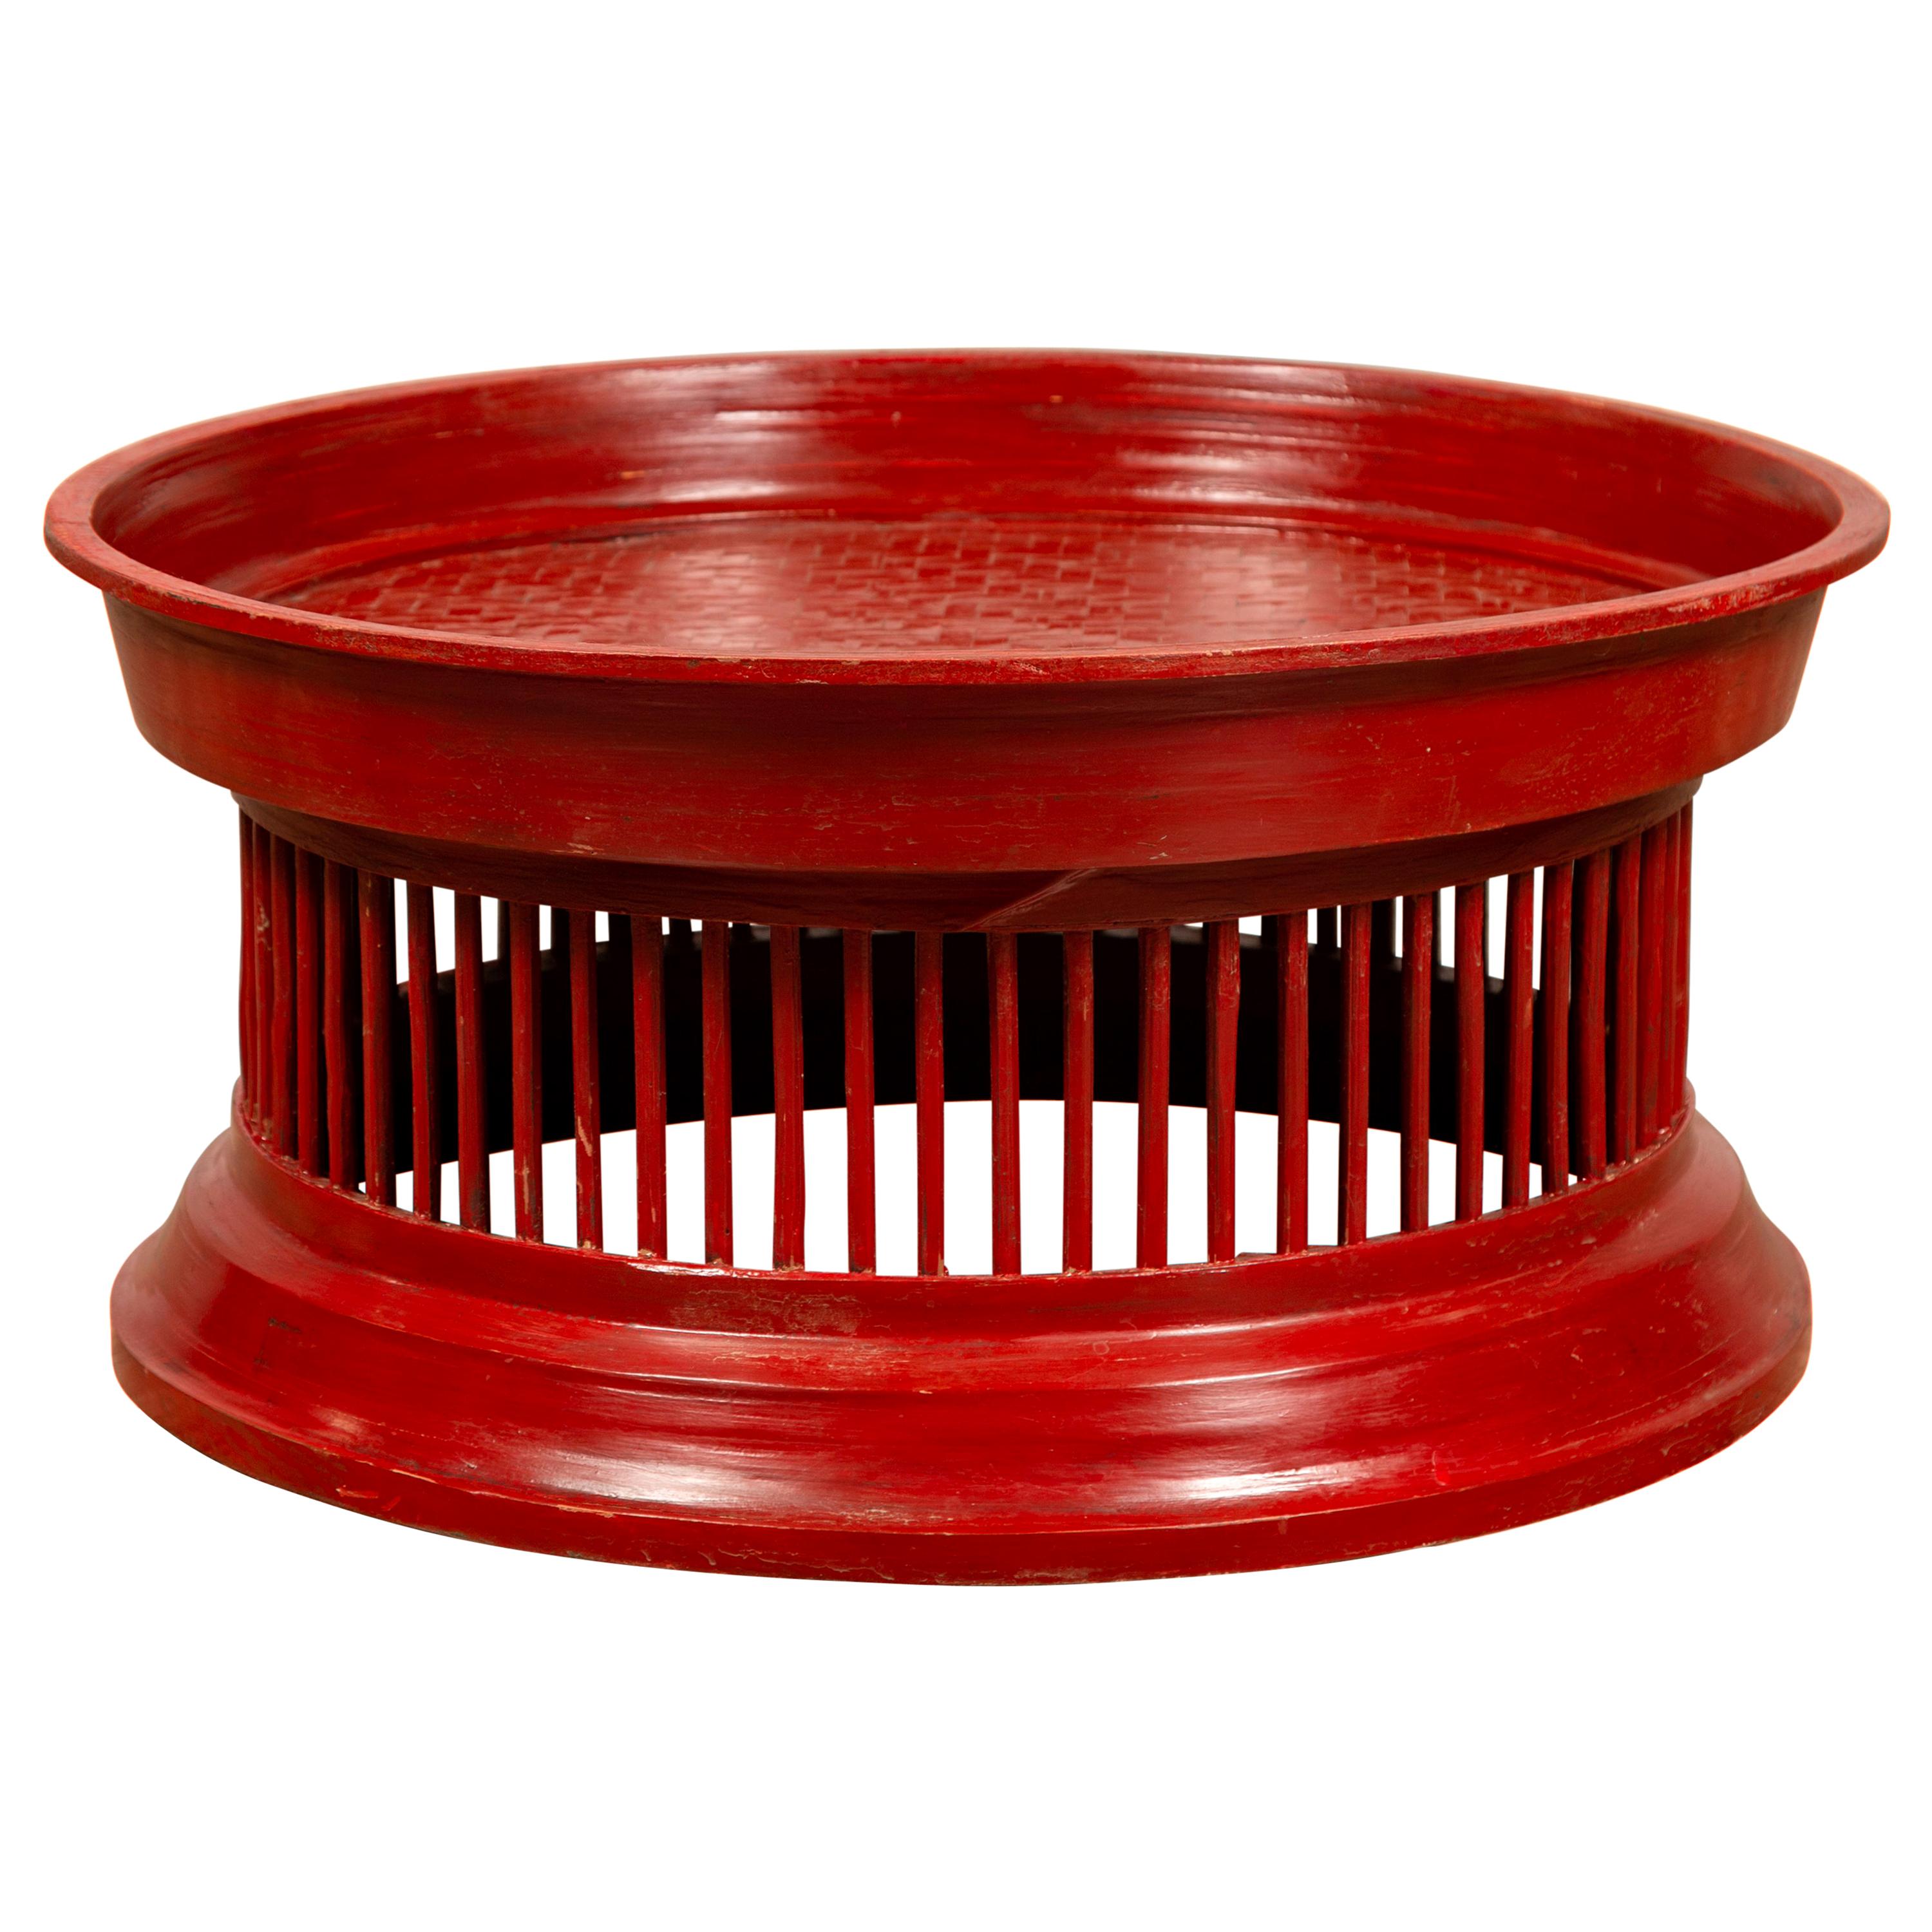 Contemporary Thai Red Lacquered Rattan Drum Coffee Table with Spindle Motifs